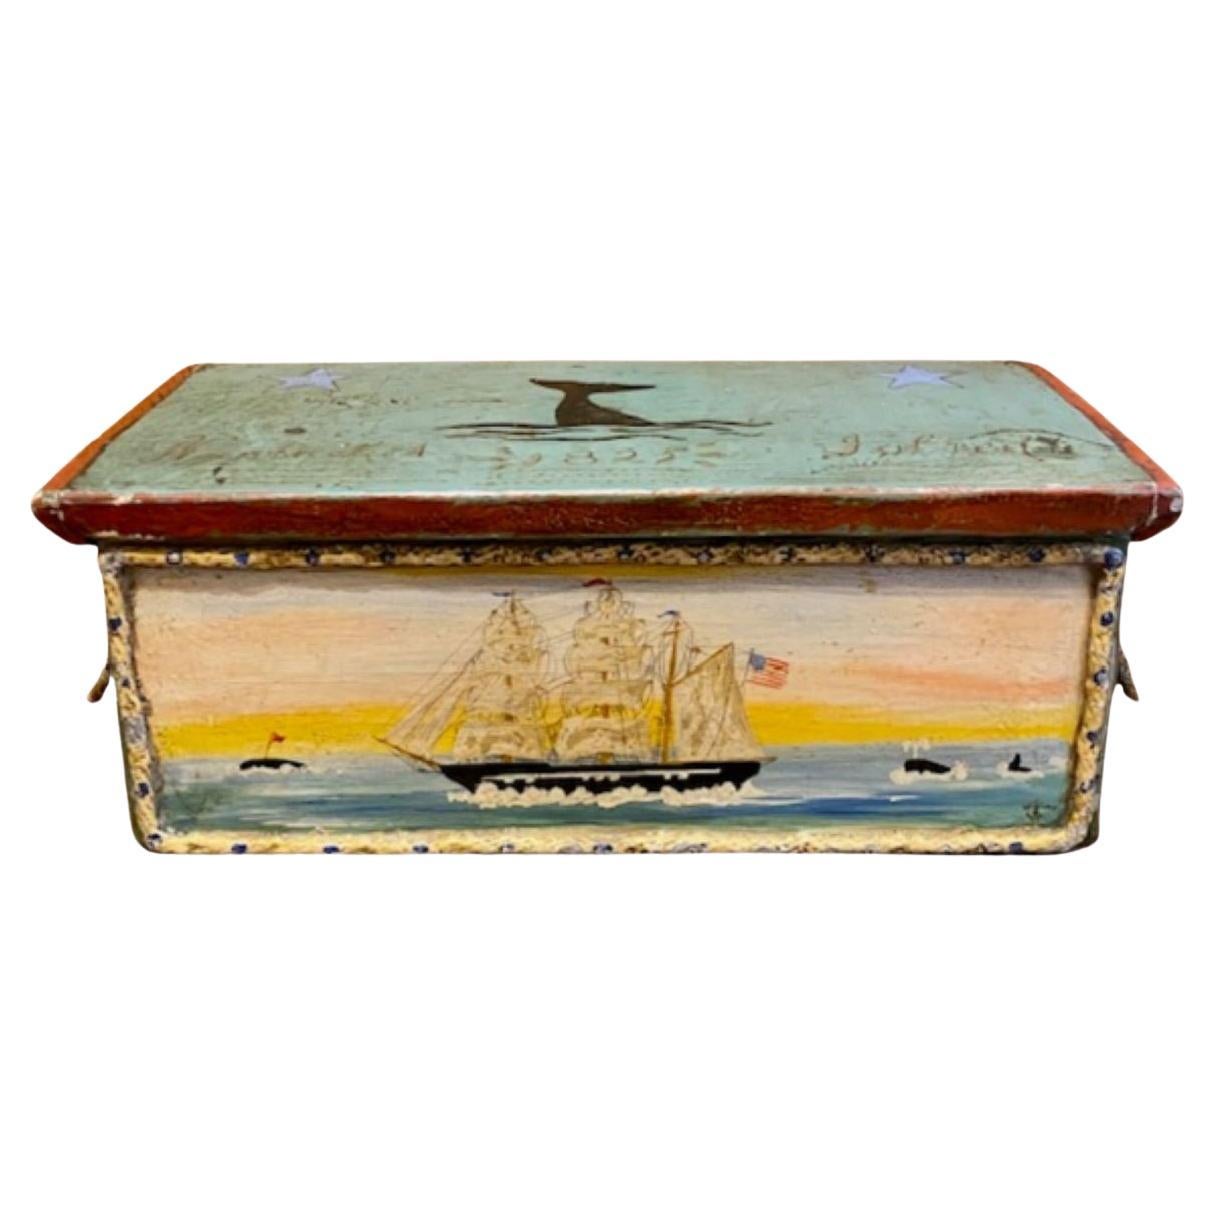 Miniature Whaling Decorated Sea Chest, circa 1920s